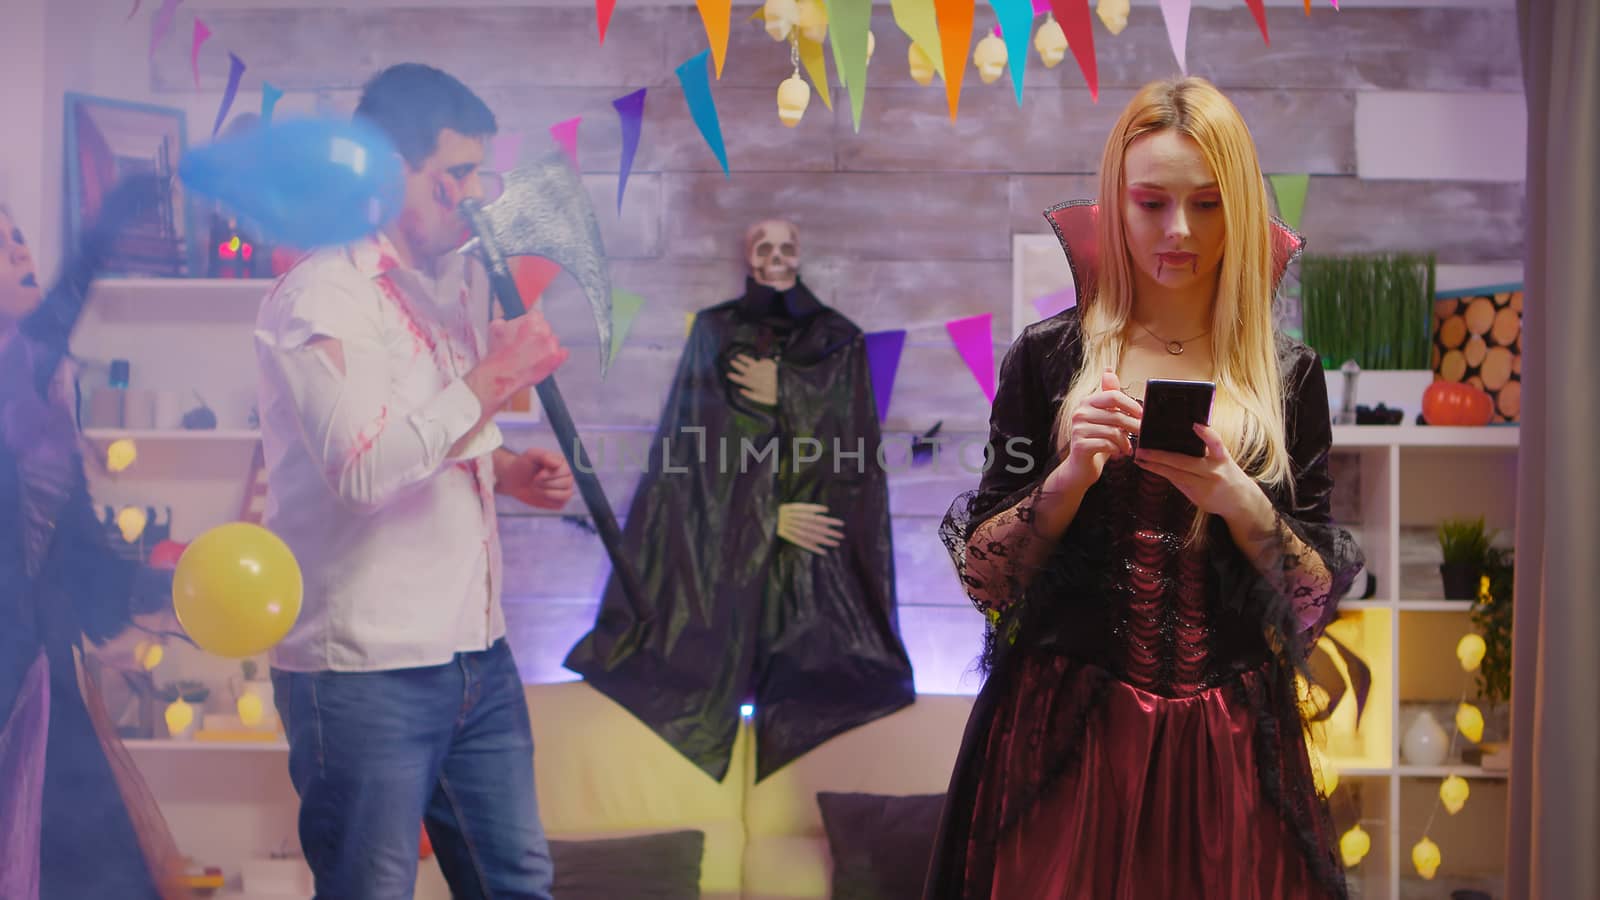 Beautiful woman dressed up like an enchantress using her smartphone at halloween party with people dancing in the background.